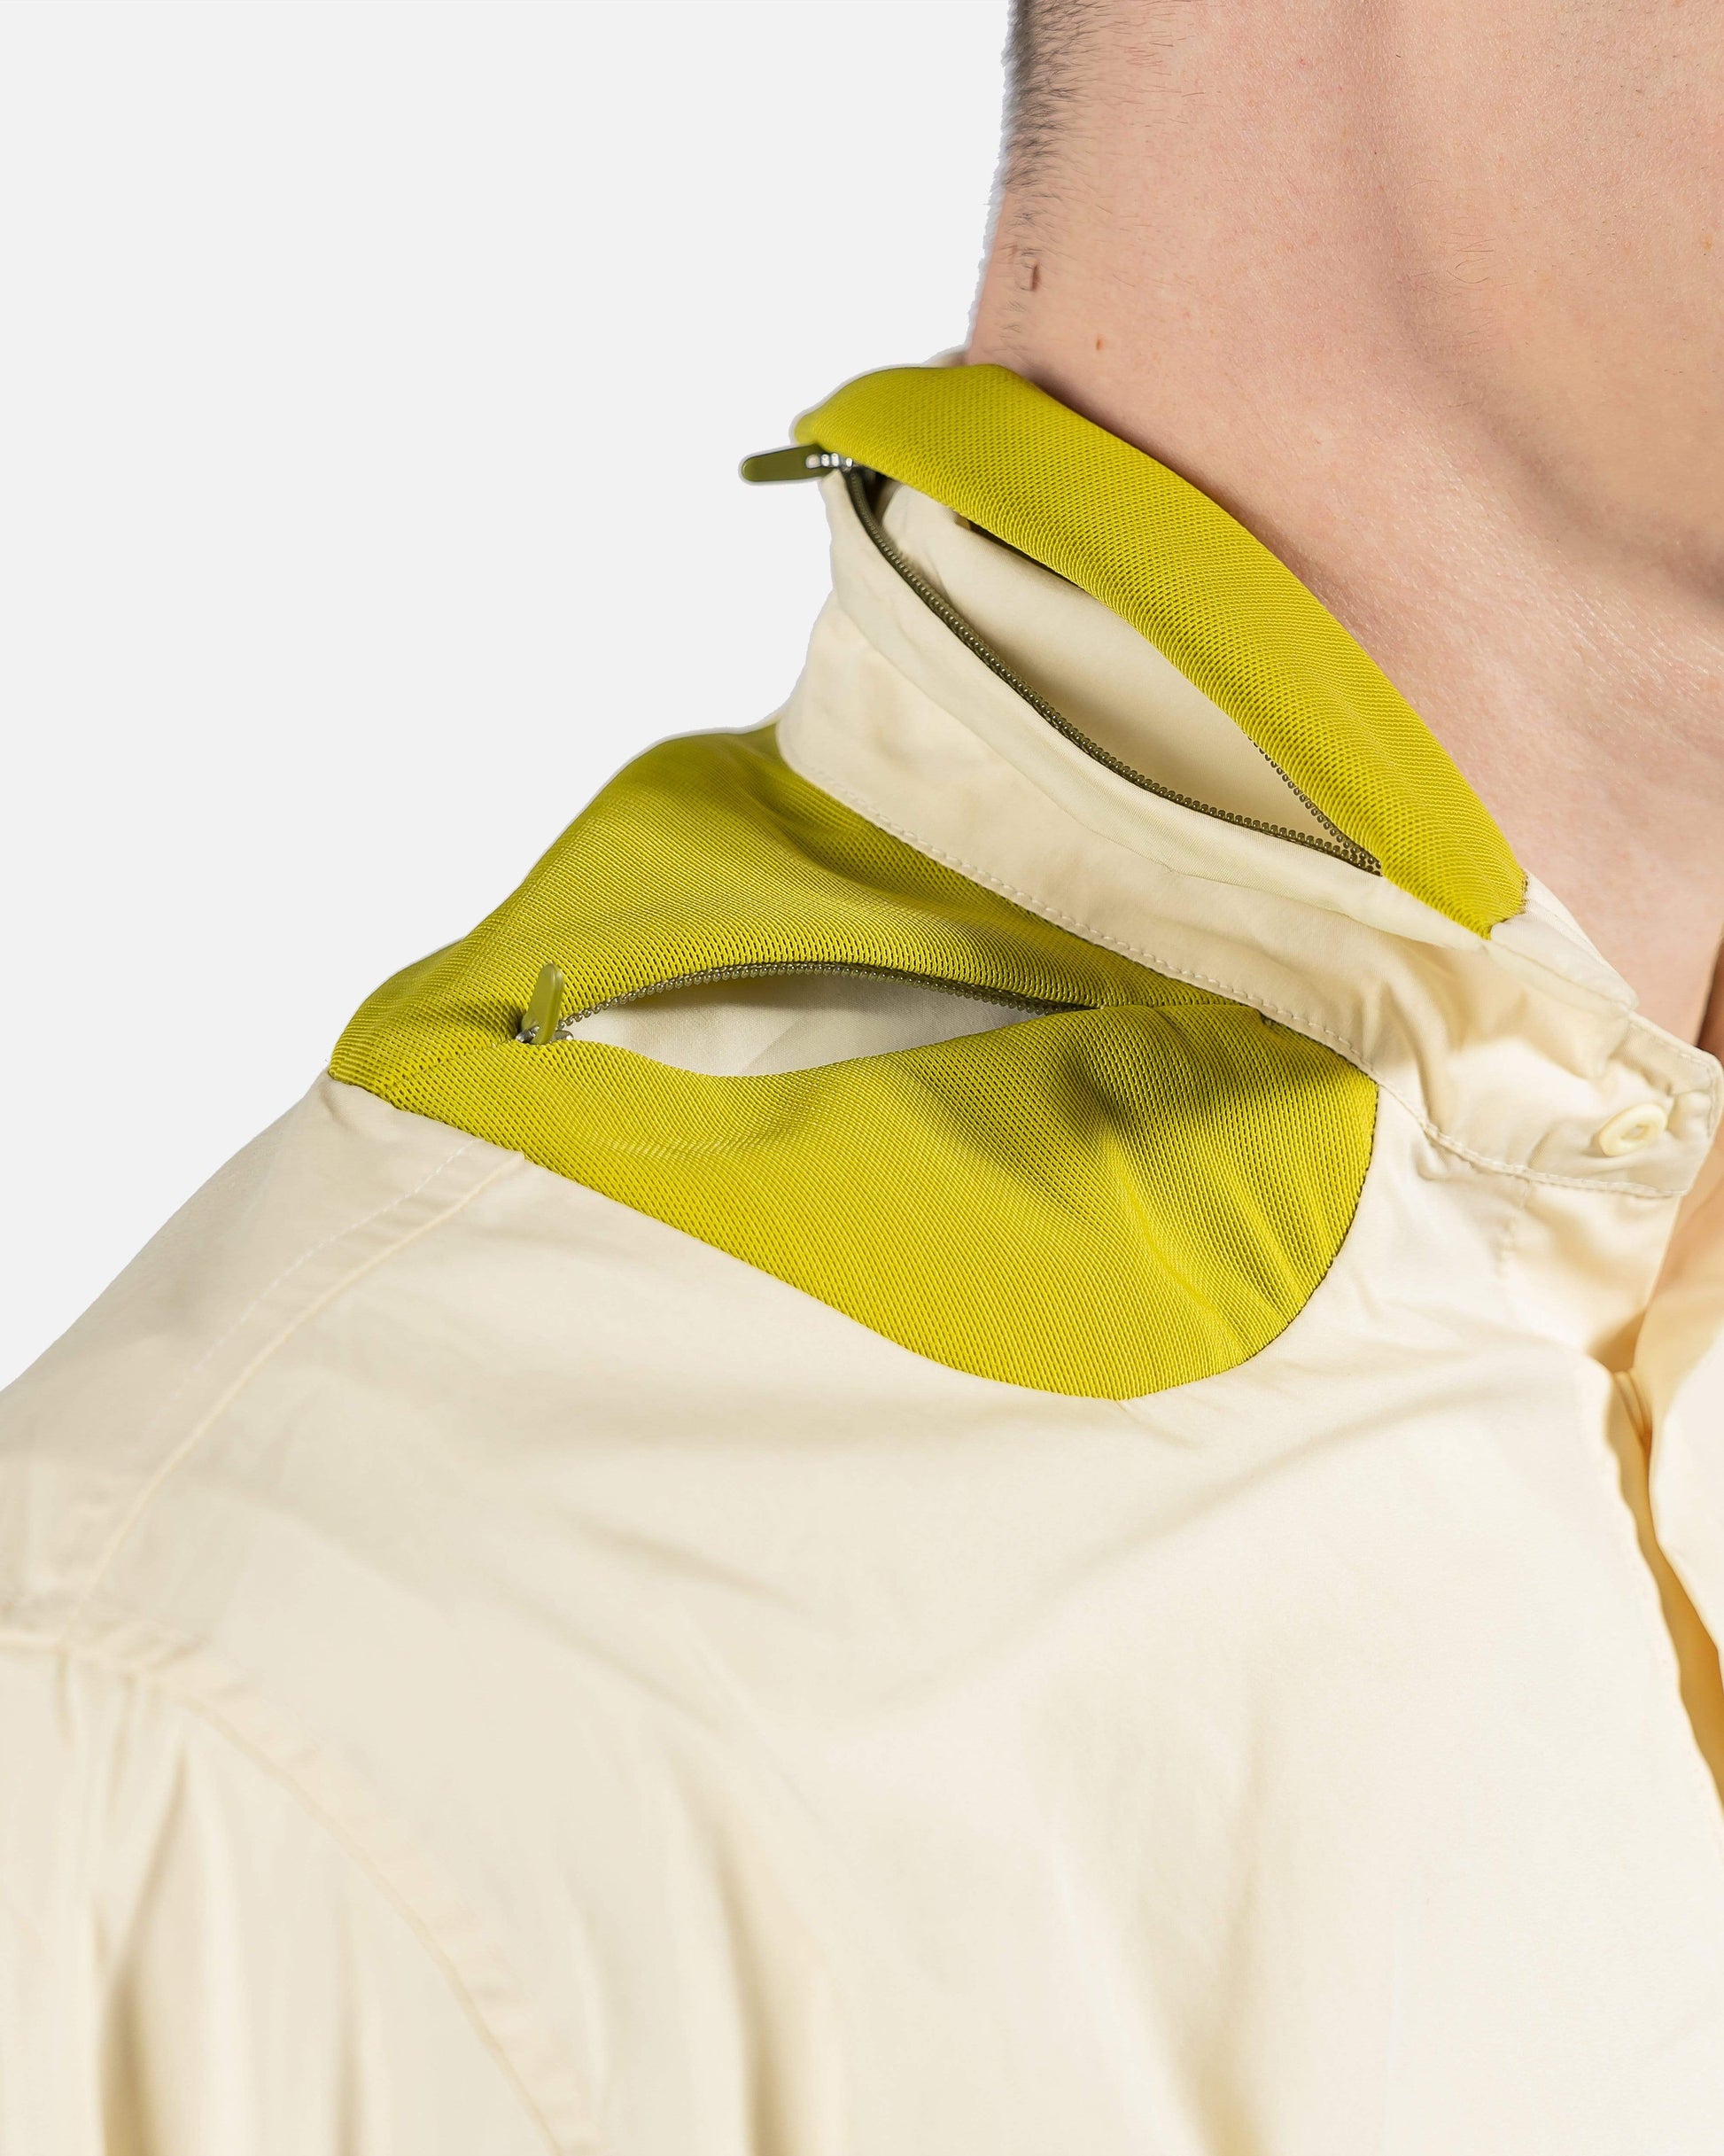 POST ARCHIVE FACTION (P.A.F) Men's Shirts 4.0+ Shirt Center in Light Yellow